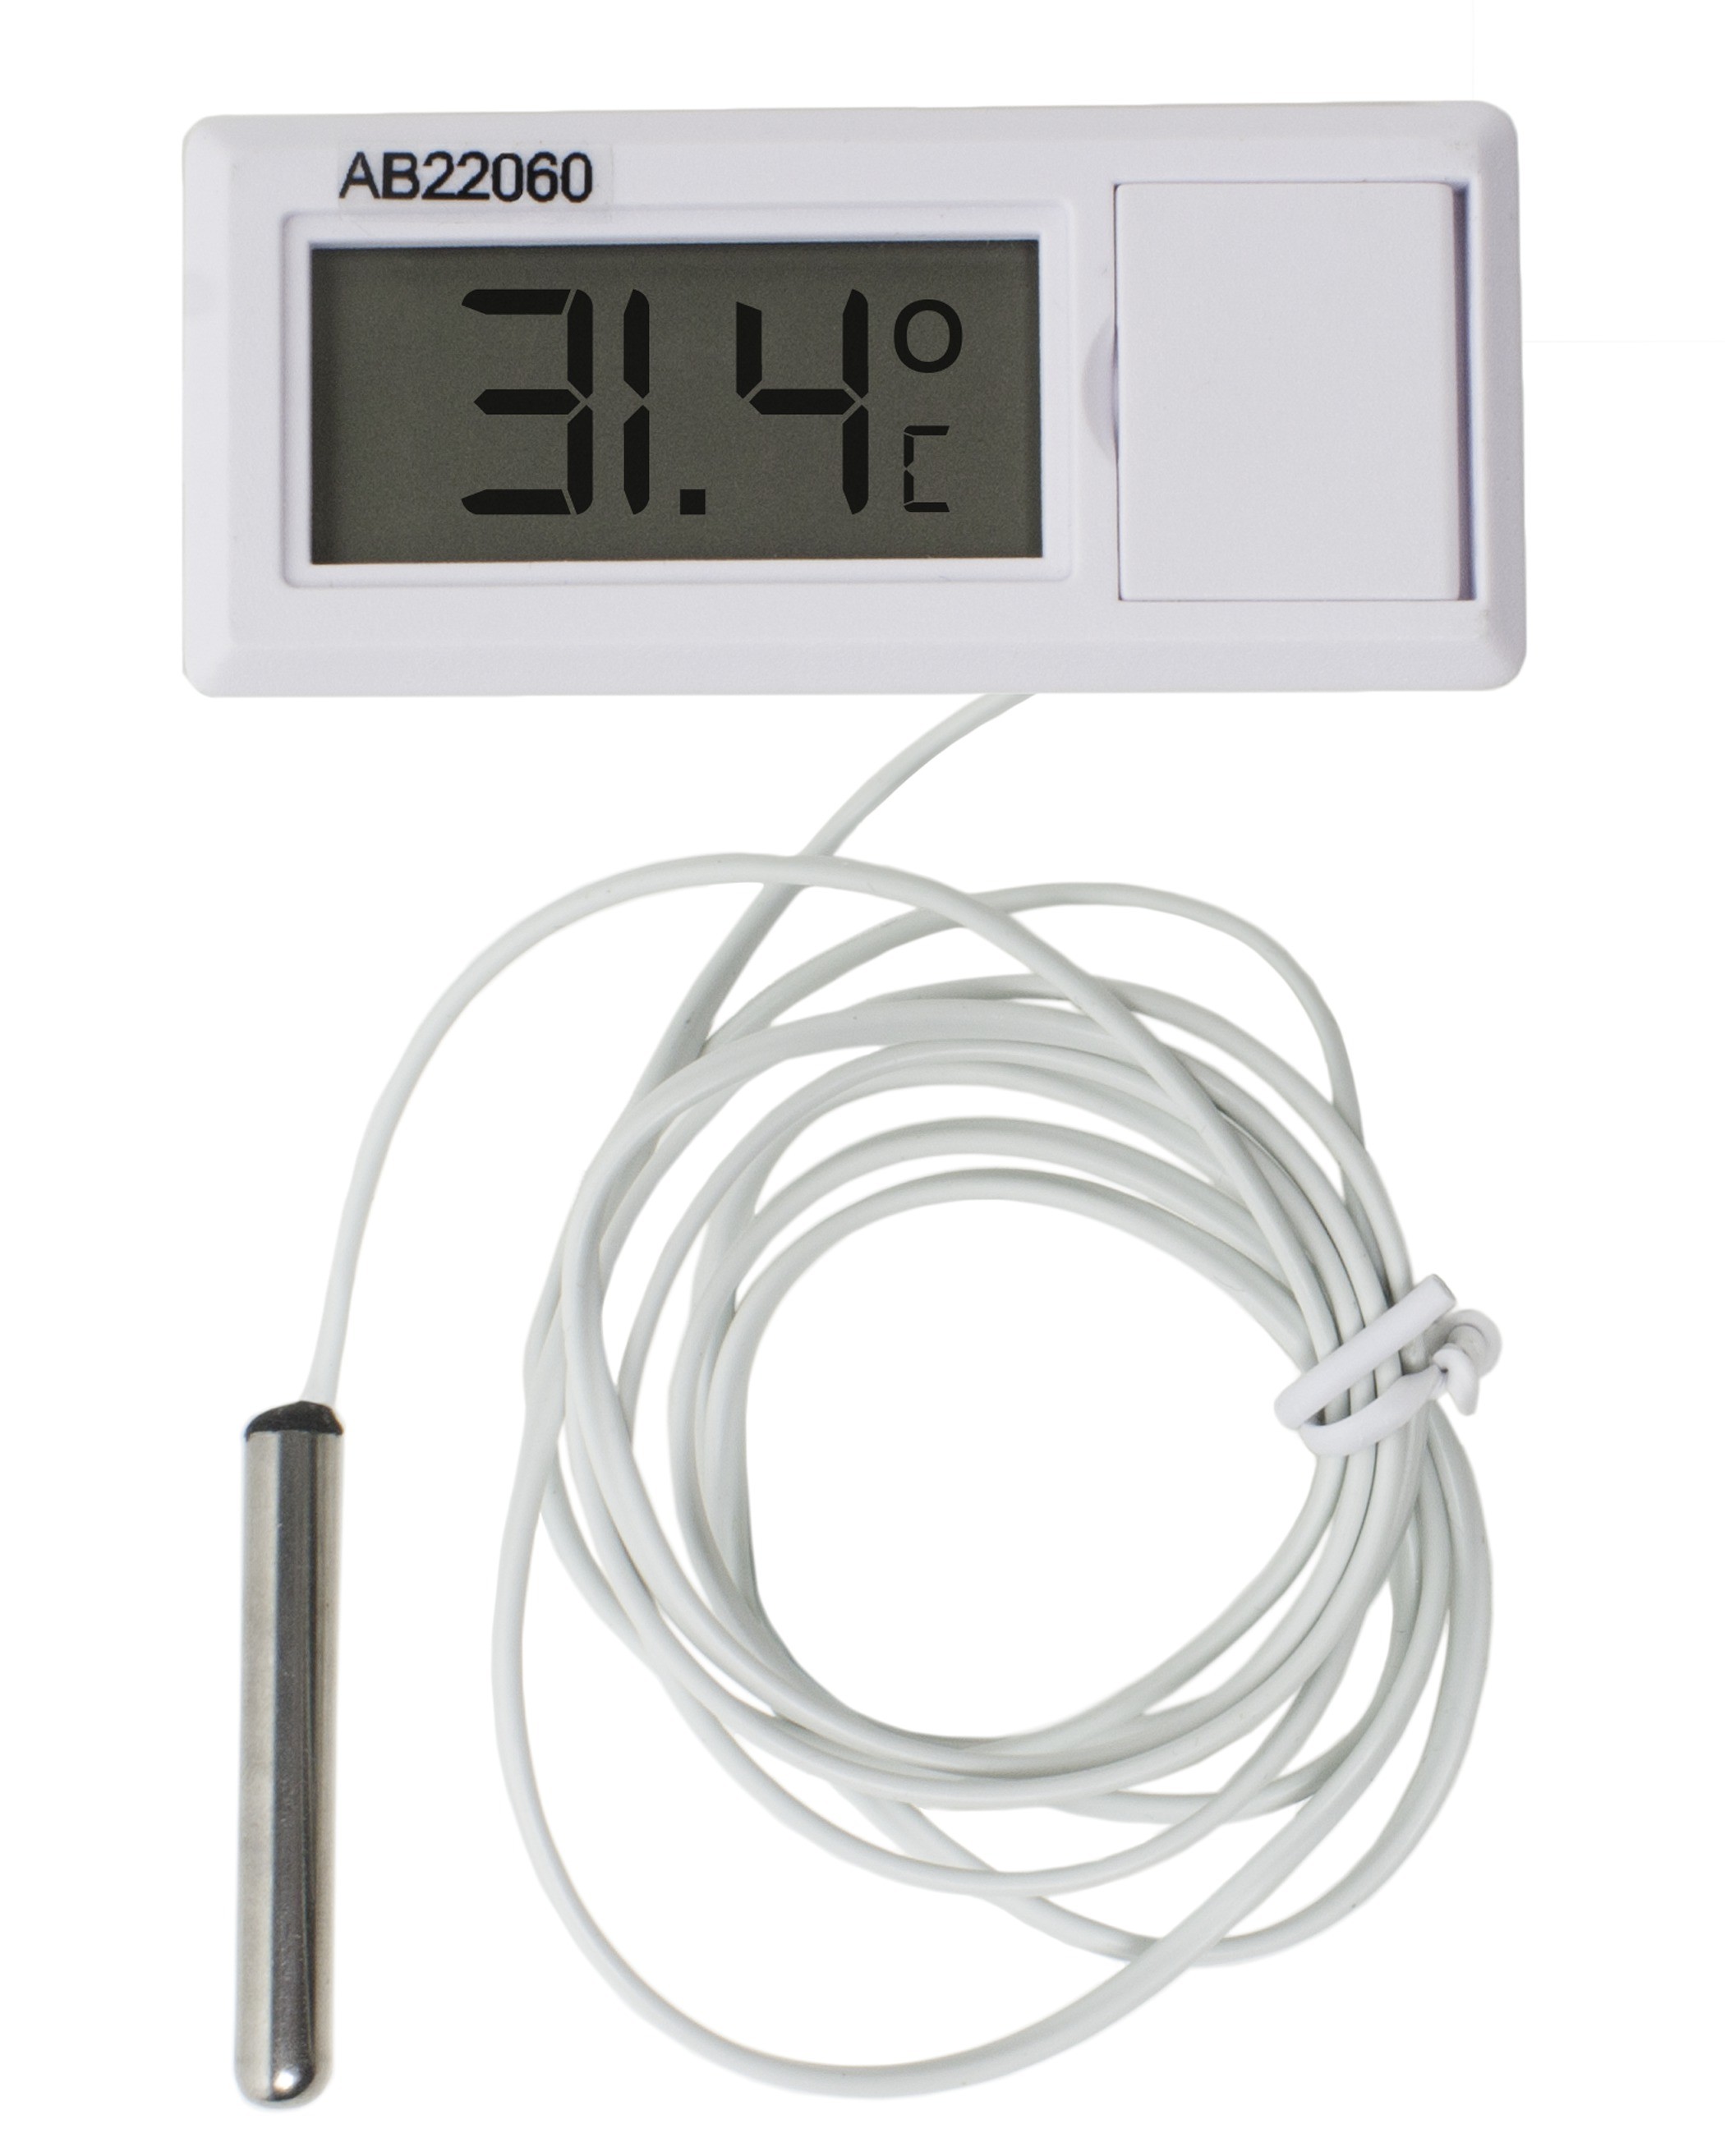 Bel-Art H-B Instruments Thermometer - BEL DURAC 50/200C Formerly Part# 3750 Qty 1 -58/392F 